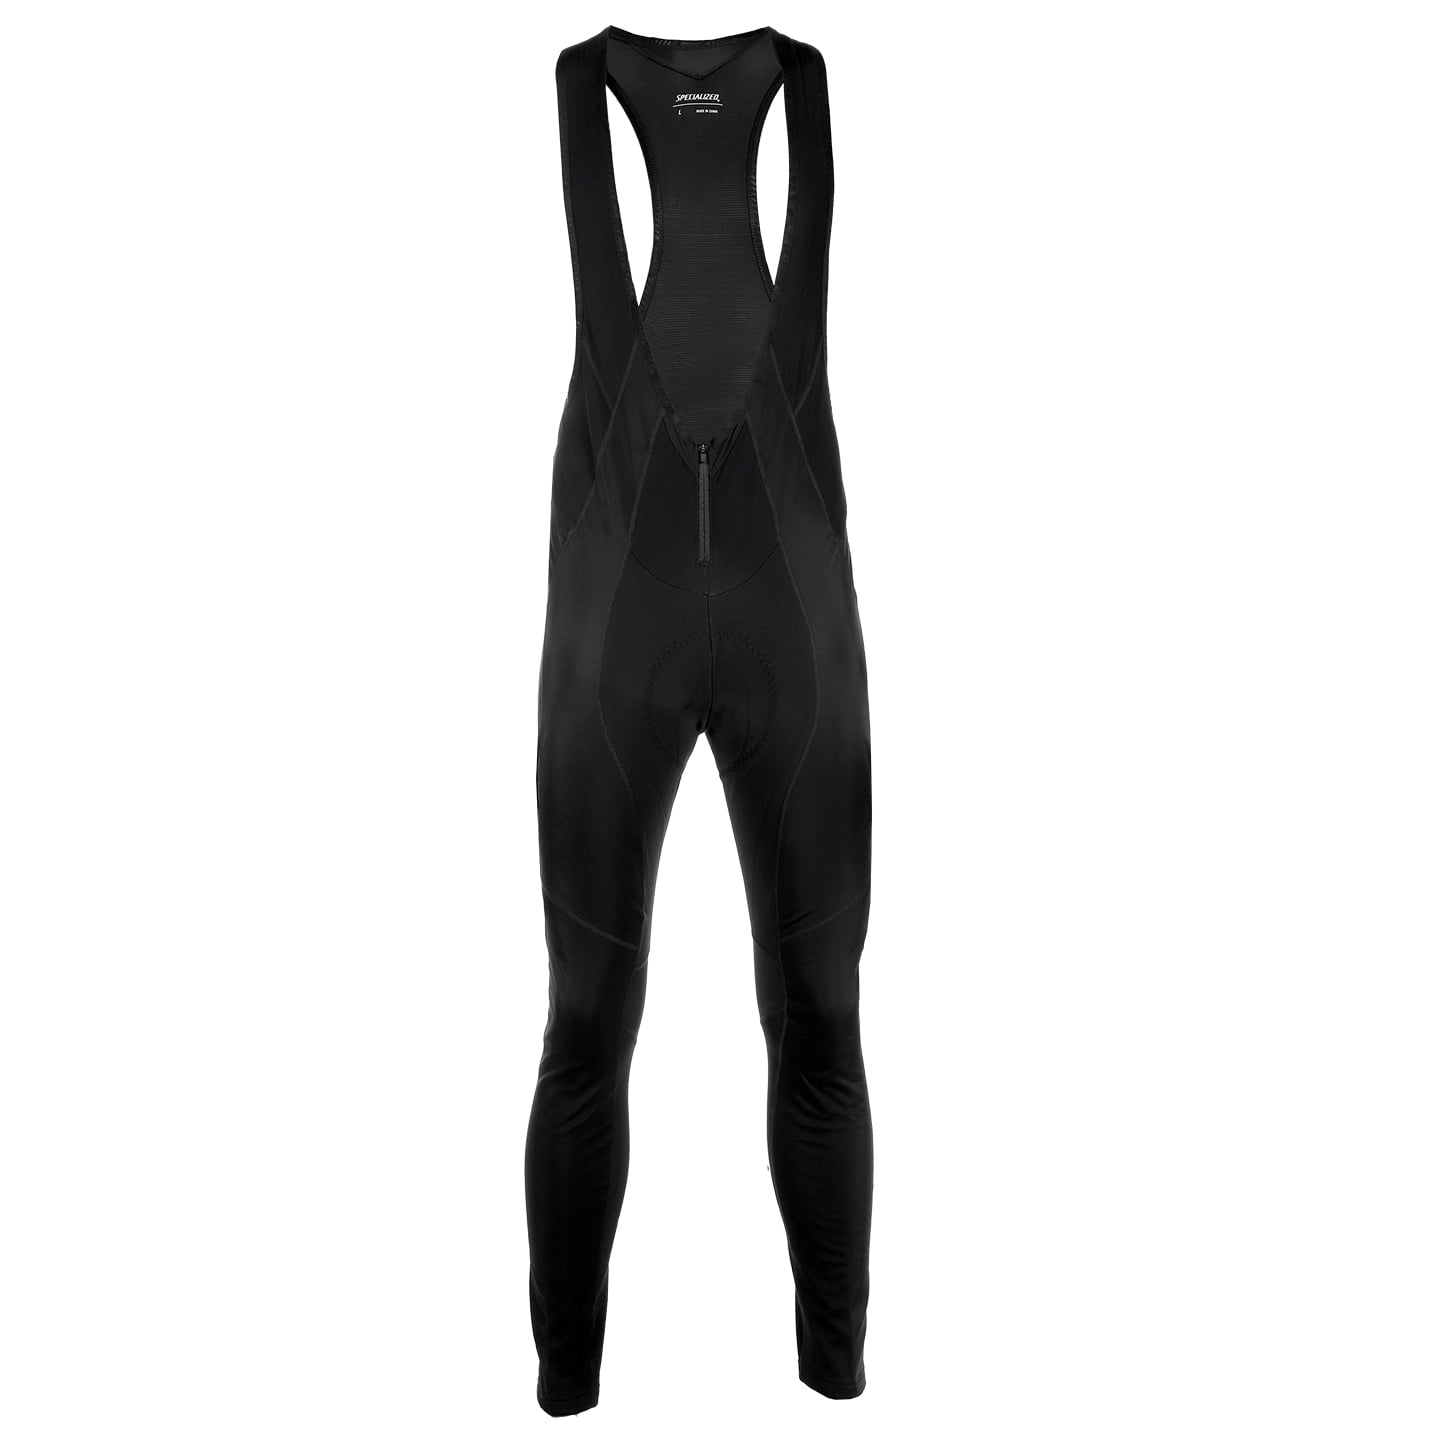 SPECIALIZED lange Tragerhose SL Expert Bib Tights Bib Tights, for men, size M, Cycle tights, Cycling clothing